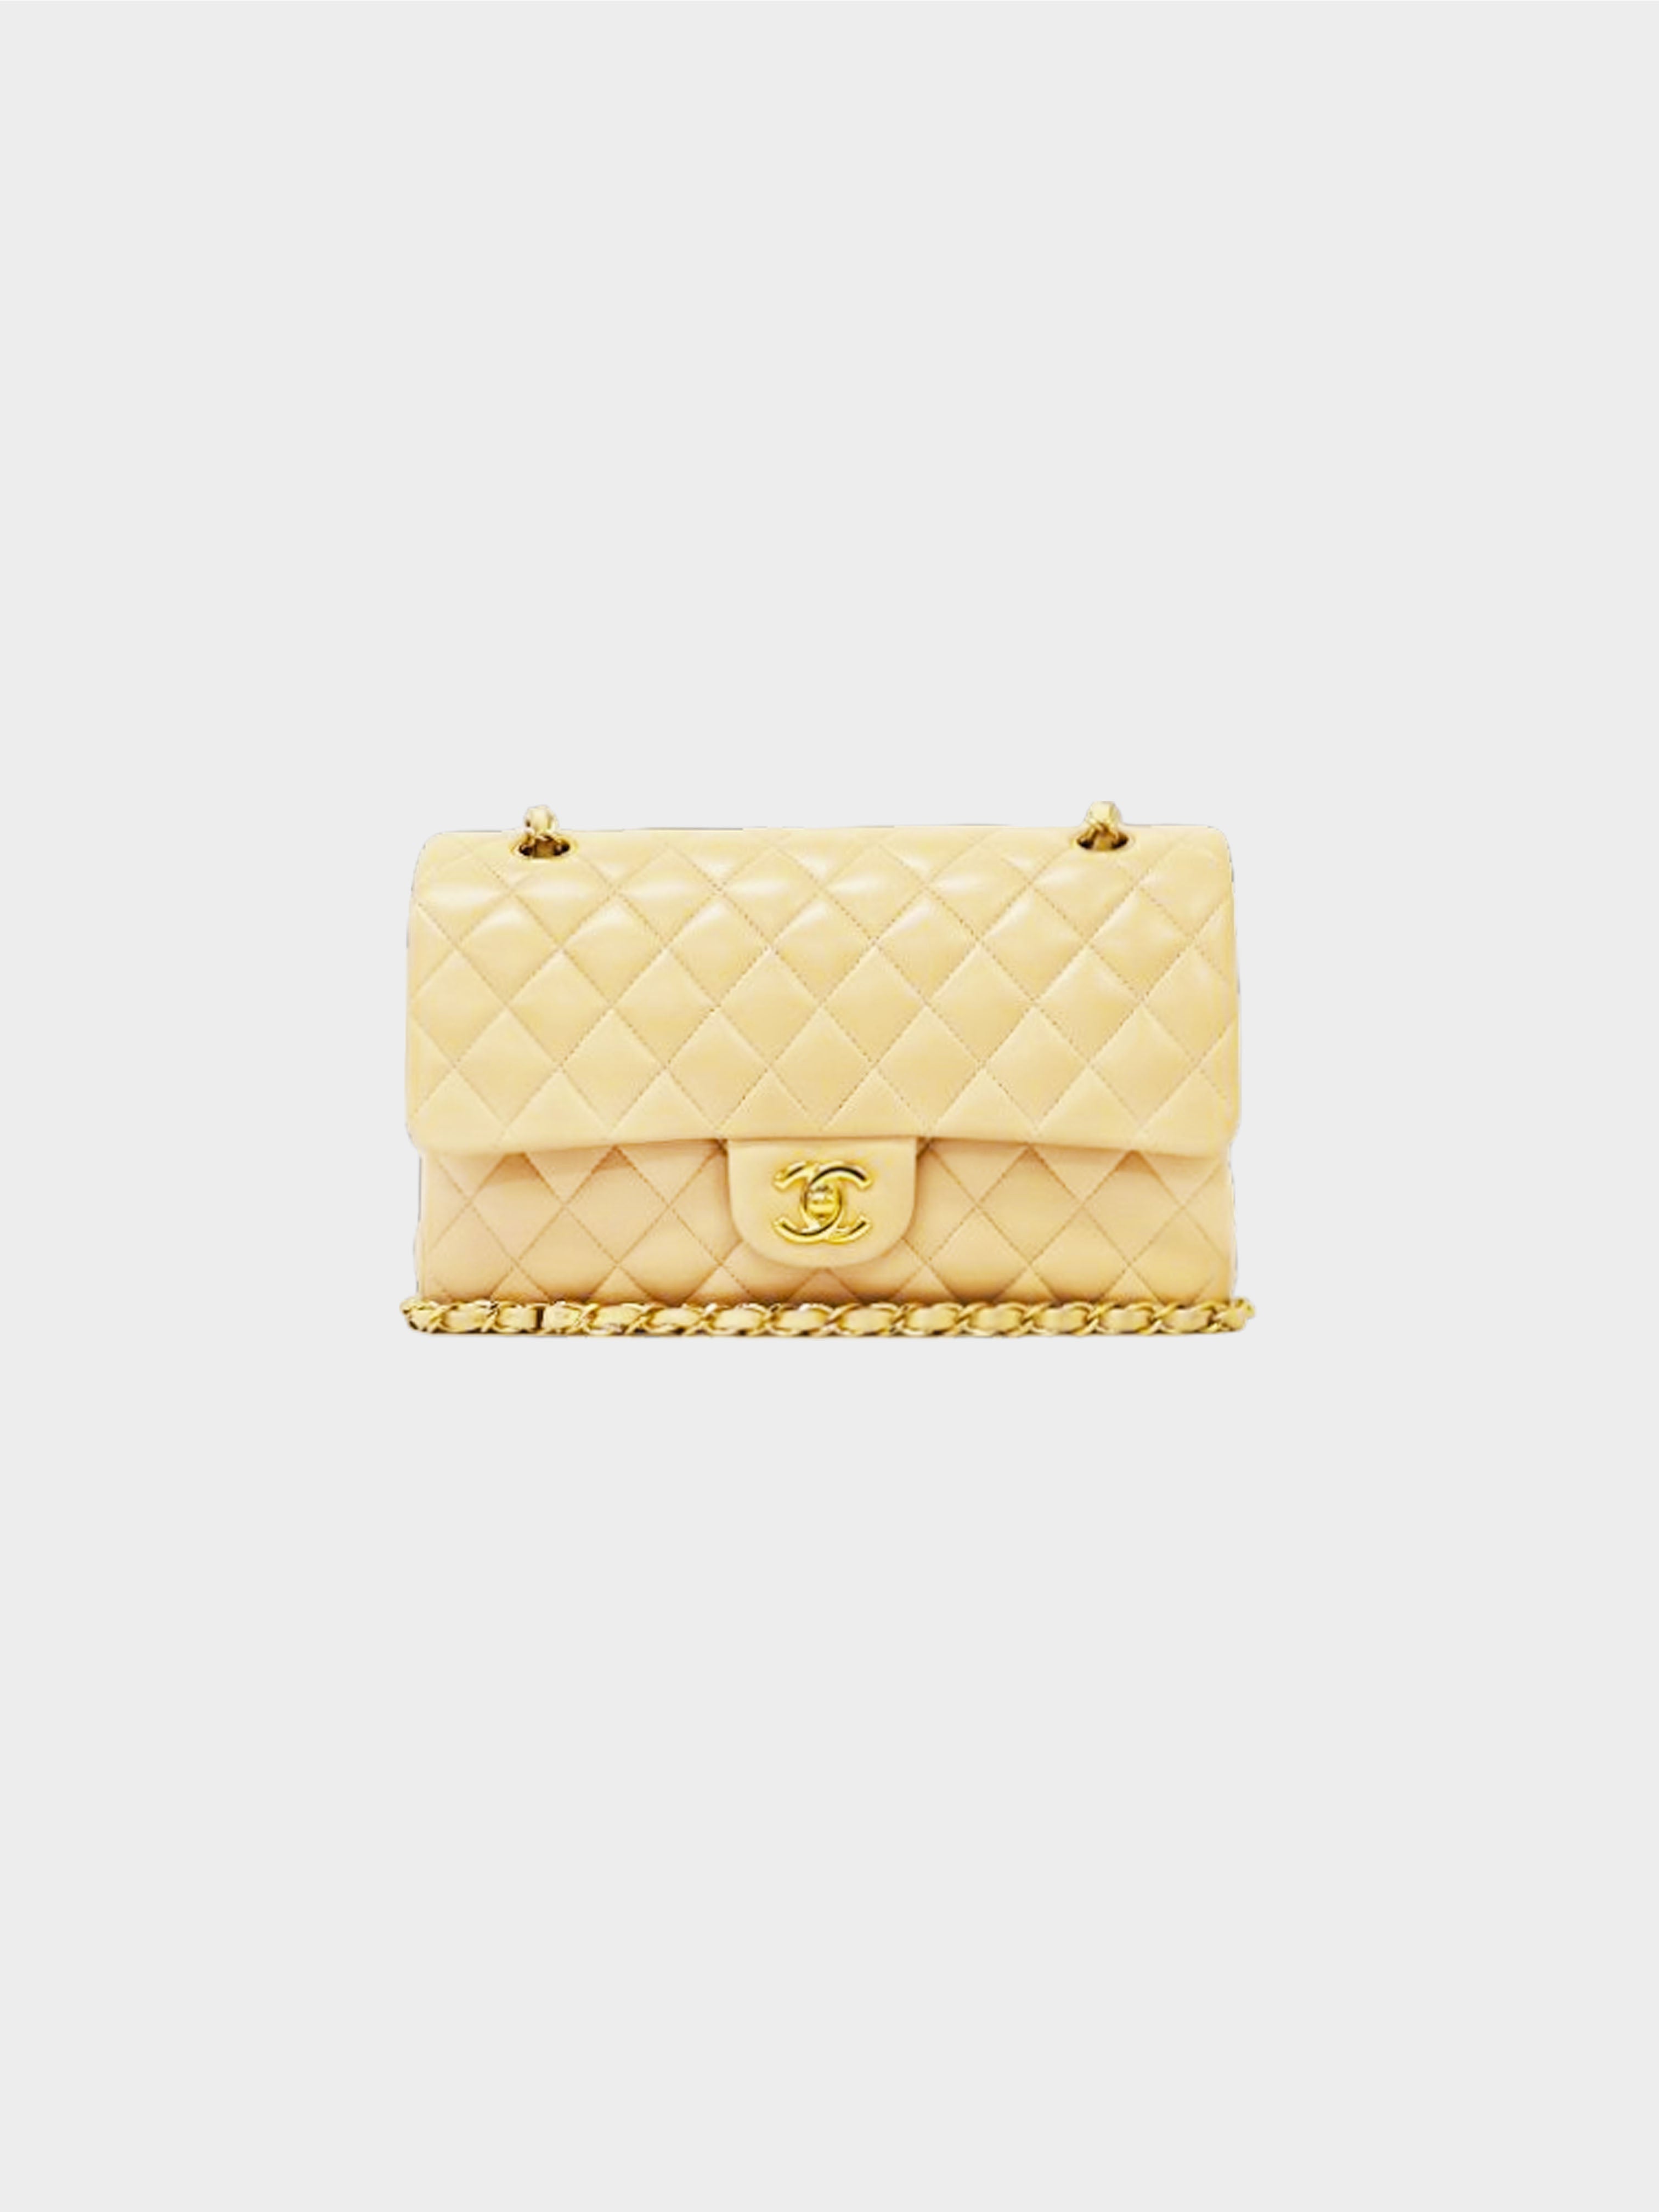 Chanel Beige Bubble Quilt Lambskin Small Flap Brushed Gold Hardware, 2007  Available For Immediate Sale At Sotheby's